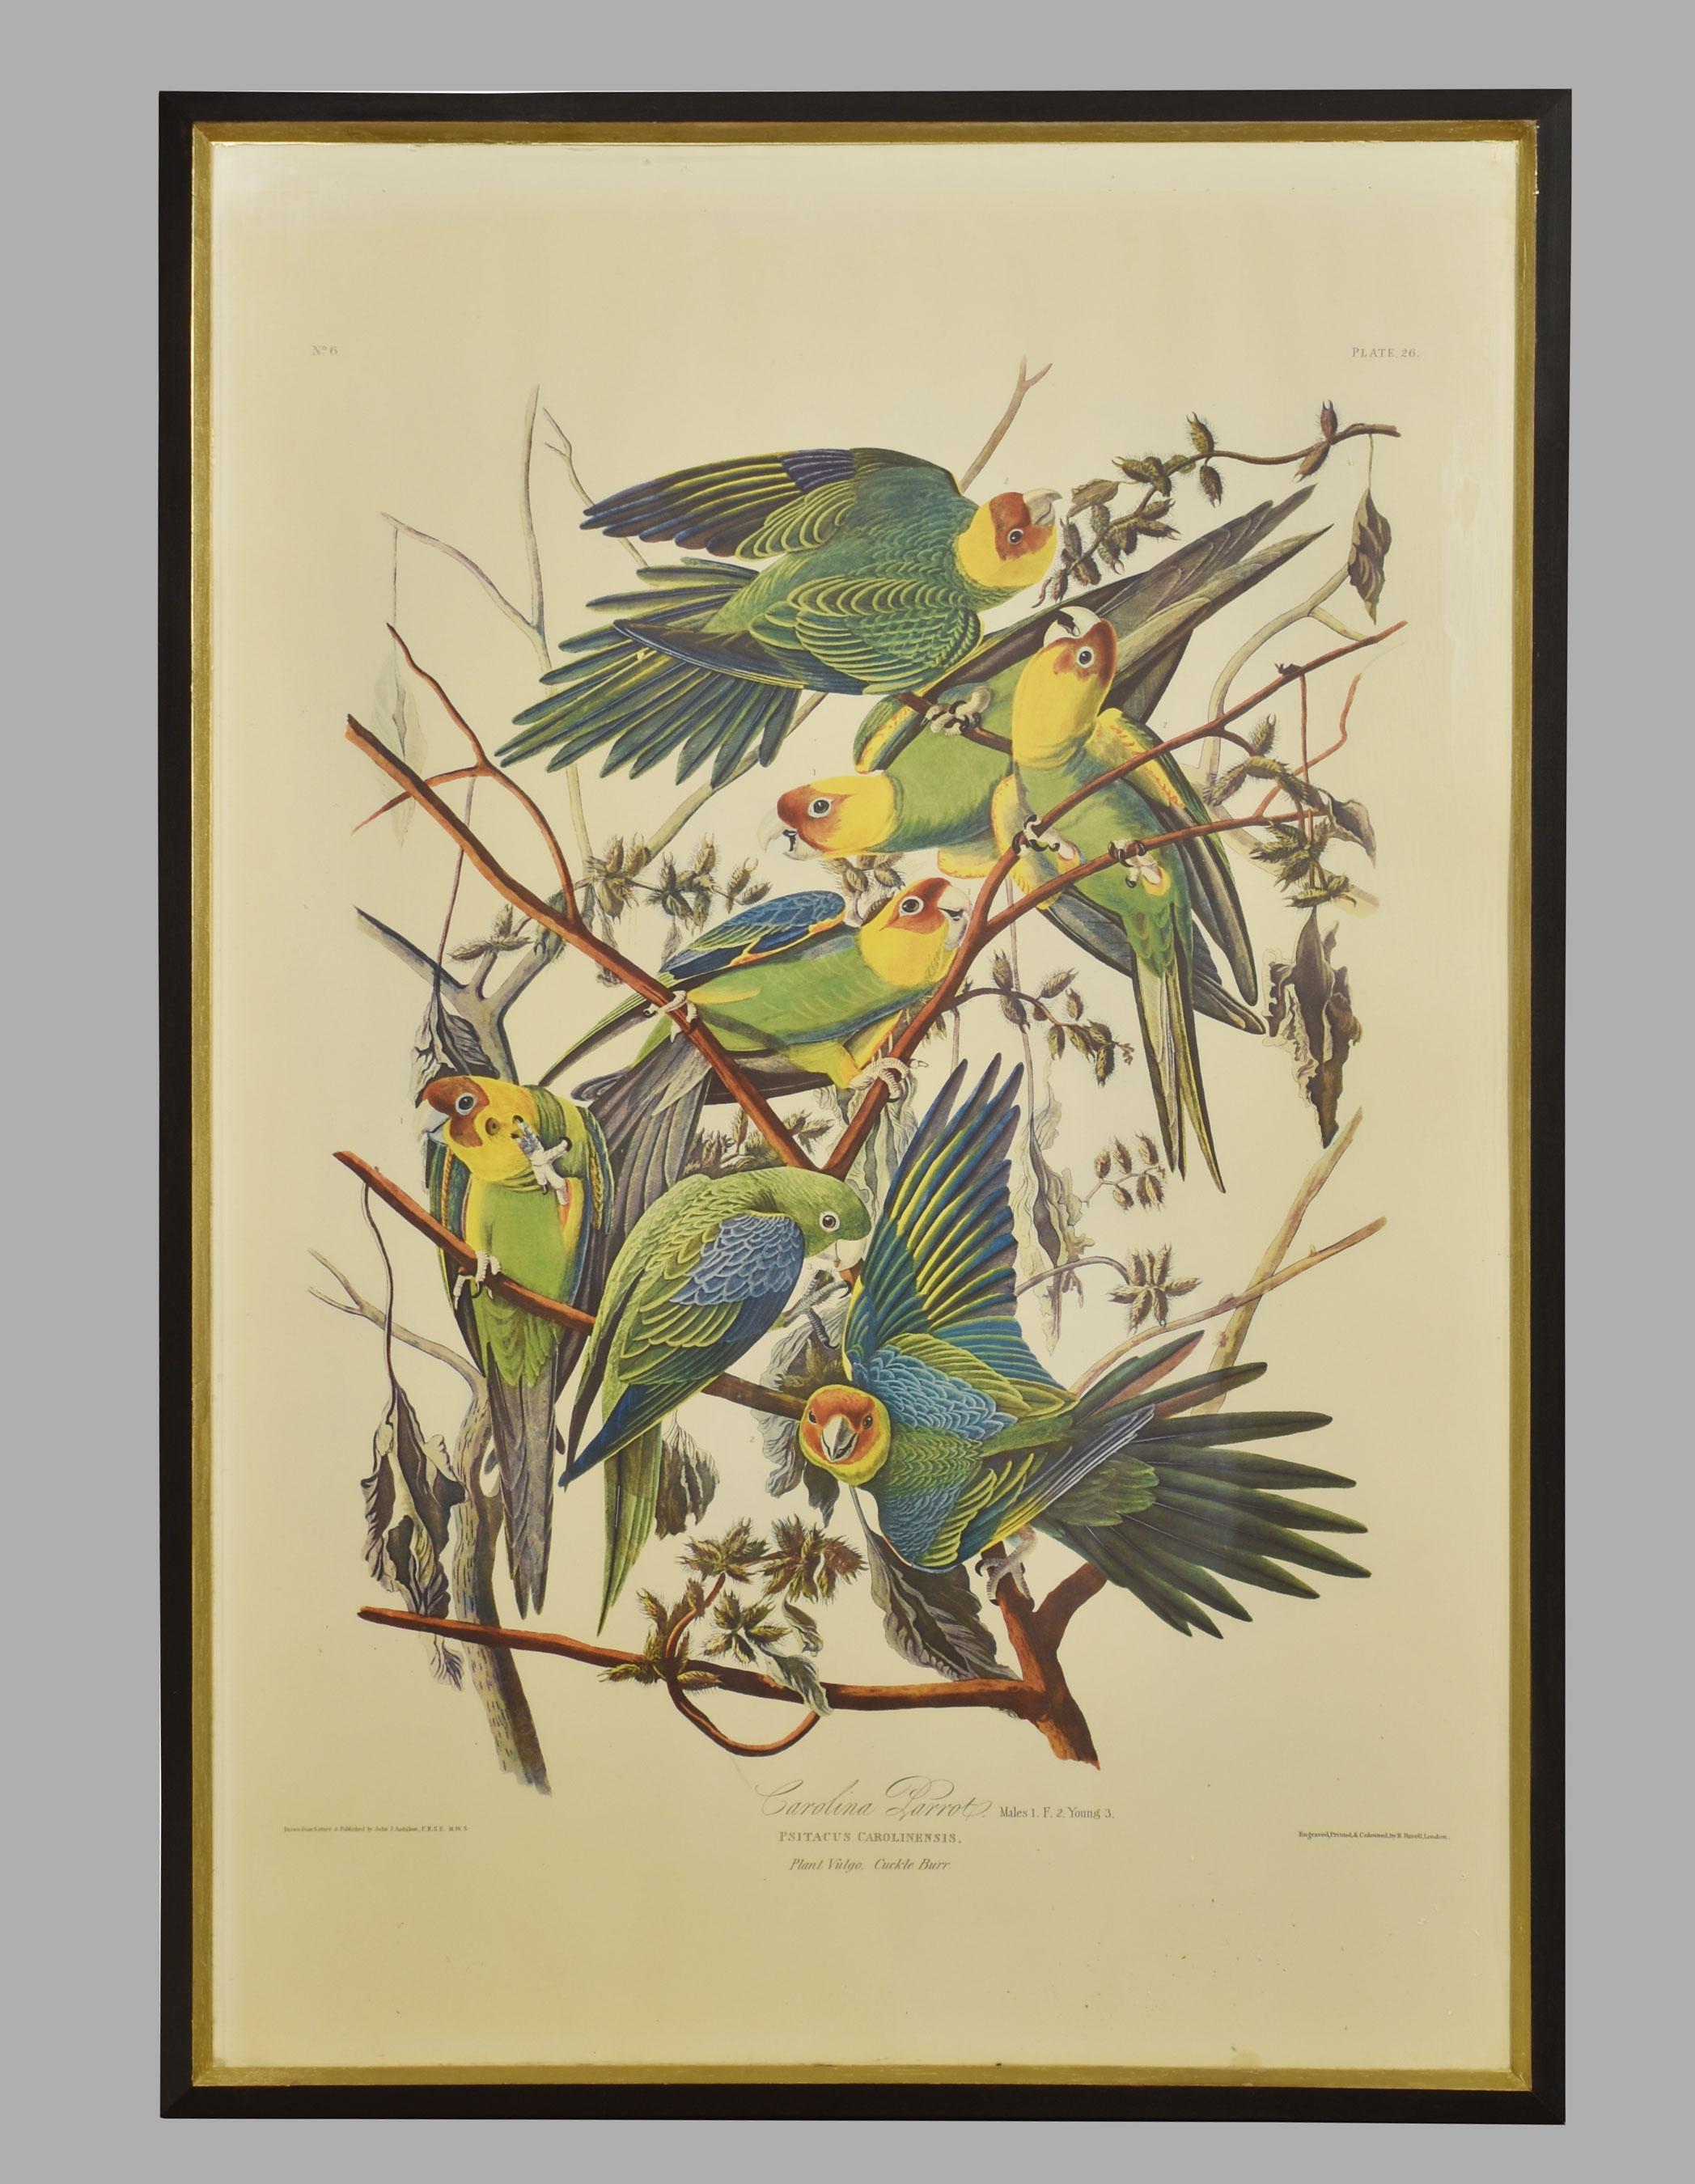 After John J Audubon, Two large ornithological studies comprising of Carolina Parrot and Red-shouldered Hawk encased in ebonies frames.
Dimensions
Height 41.5 inches
Width 28 inches
Depth 1 inches.